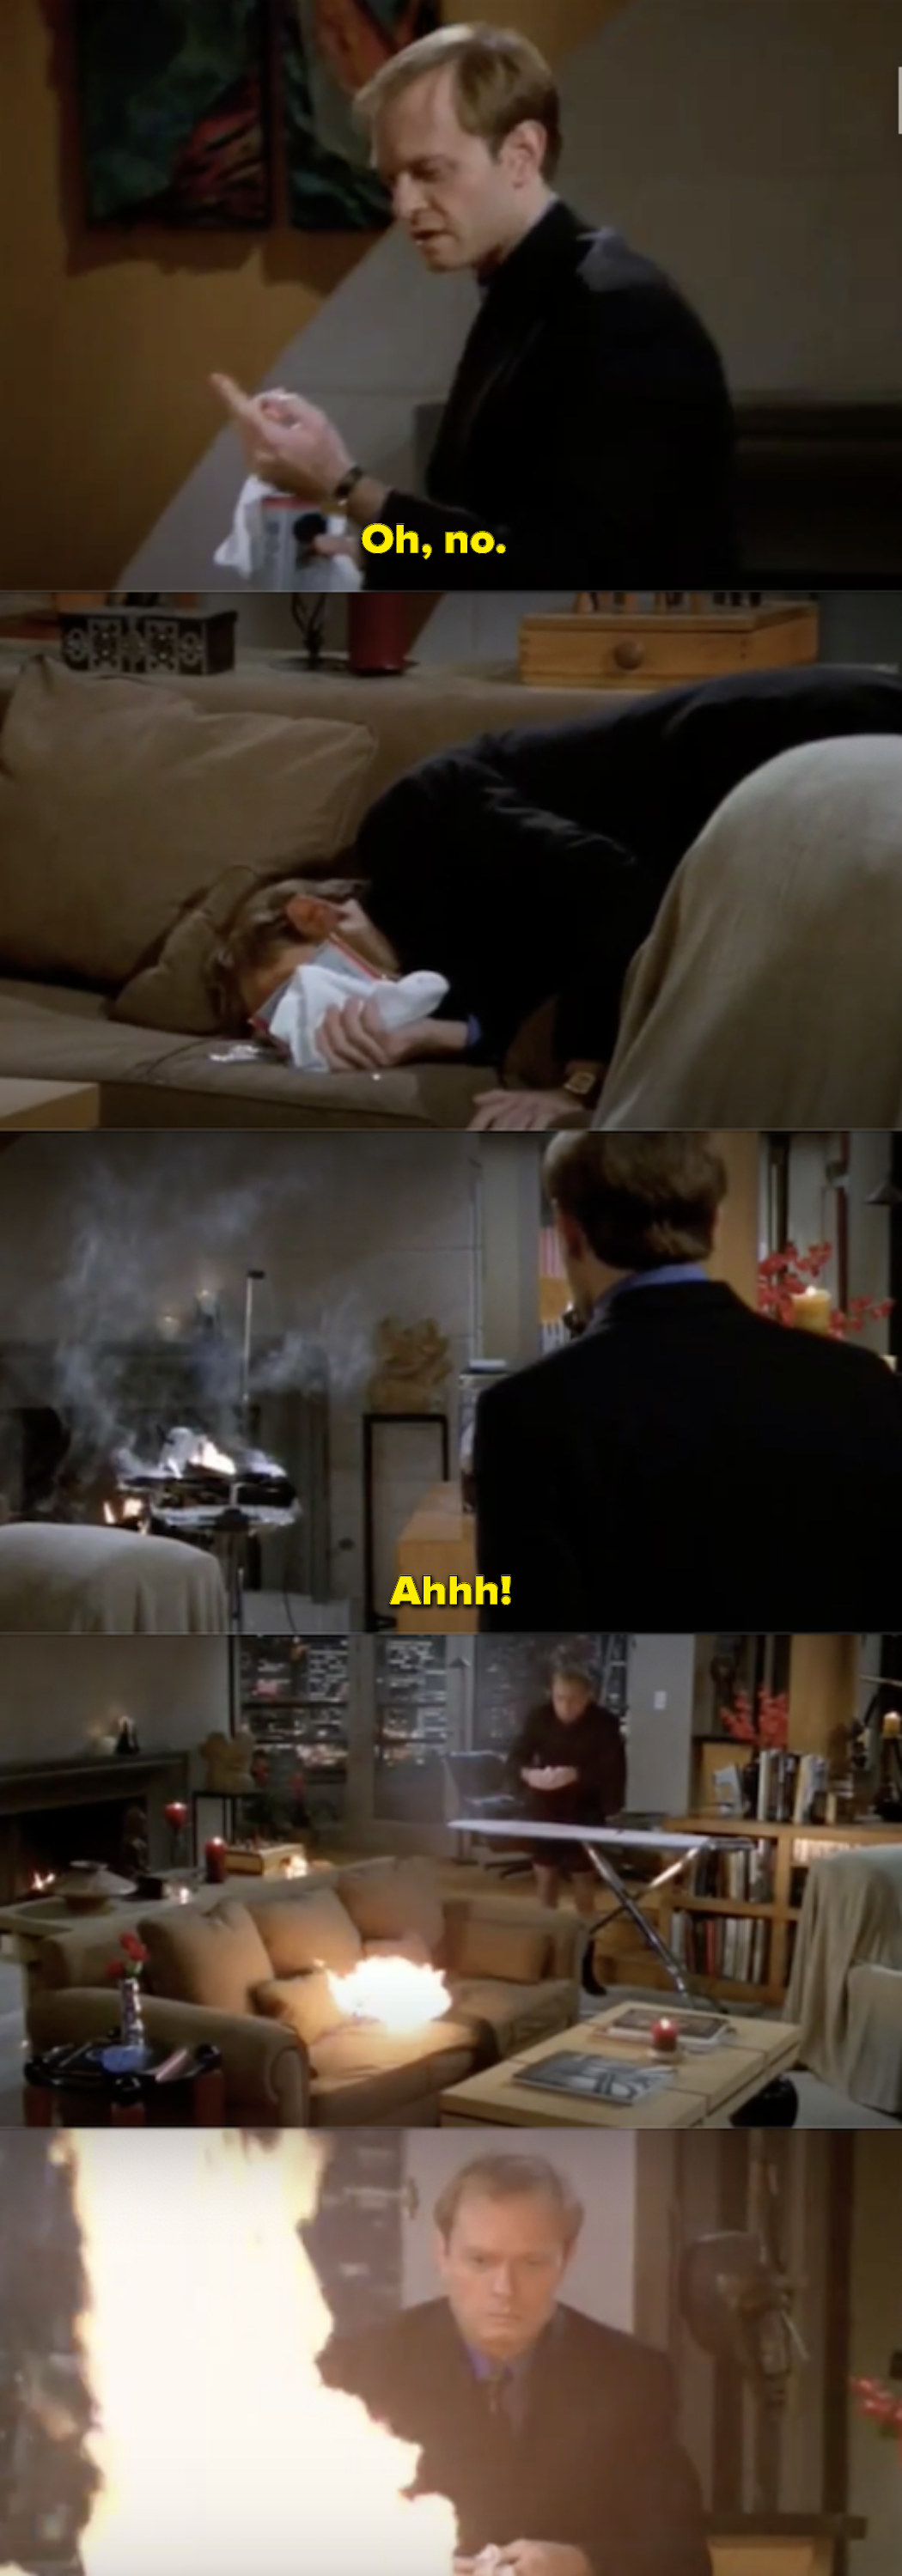 Niles accidentally setting the apartment on fire